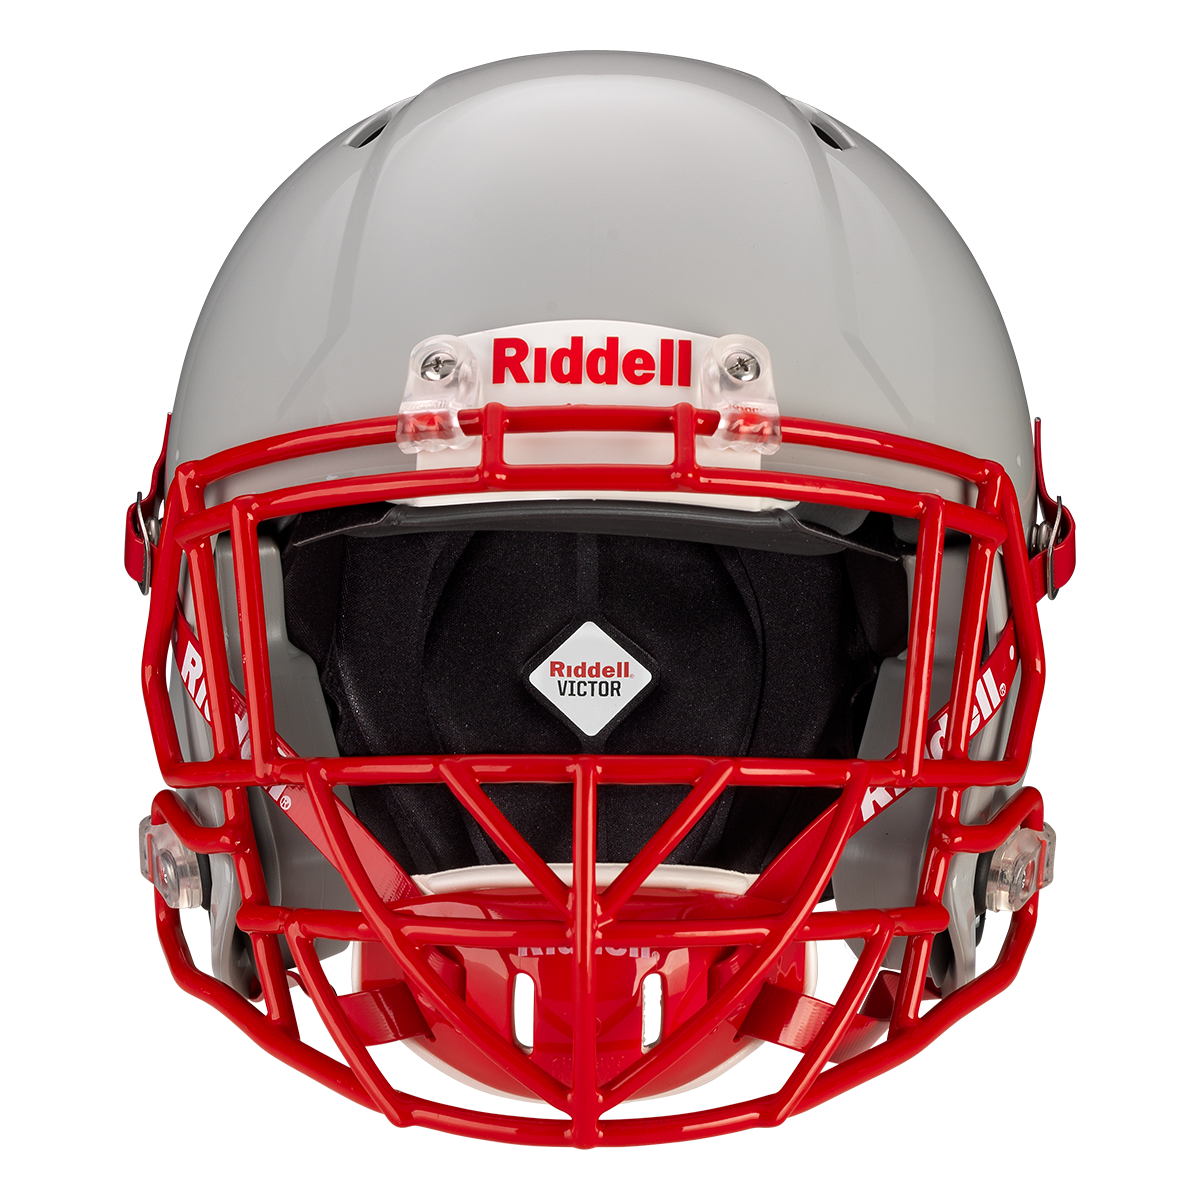 This member of the Speed Platform, is designed for Youth Players up to Junior High.  HS4 Face Mask Quick Change S-Pad + Inflation Bladder Air Fit Liner Patented Side Impact Protection (PSIP) Screw + T-Nut Face Mask Attachment Light Weight Techhology ABS Shell